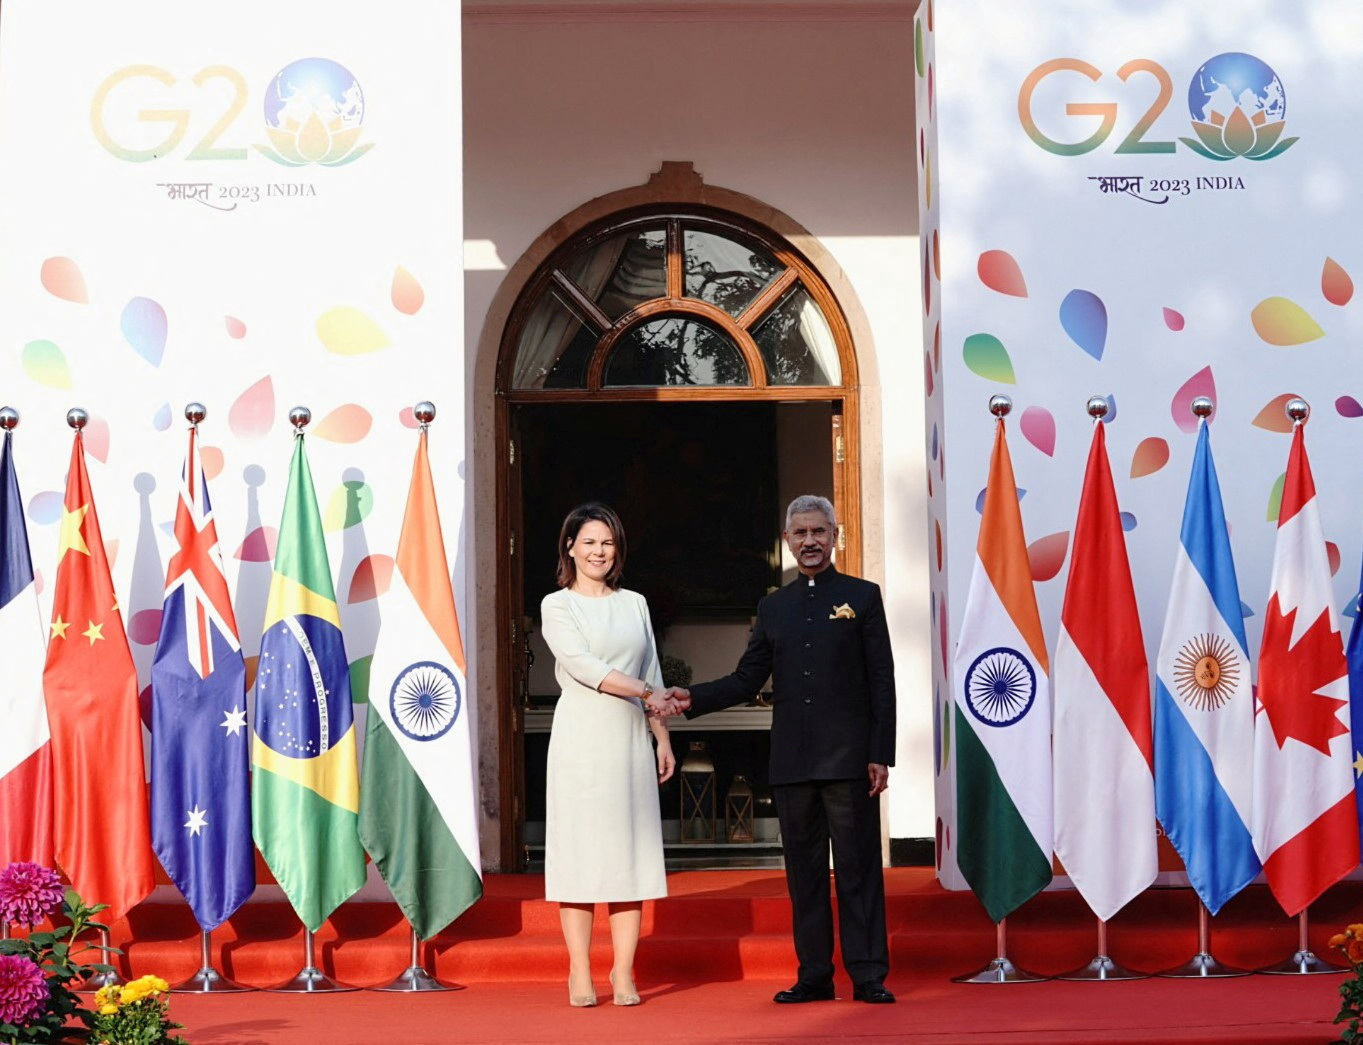 G20 foreign ministers' meeting in New Delhi